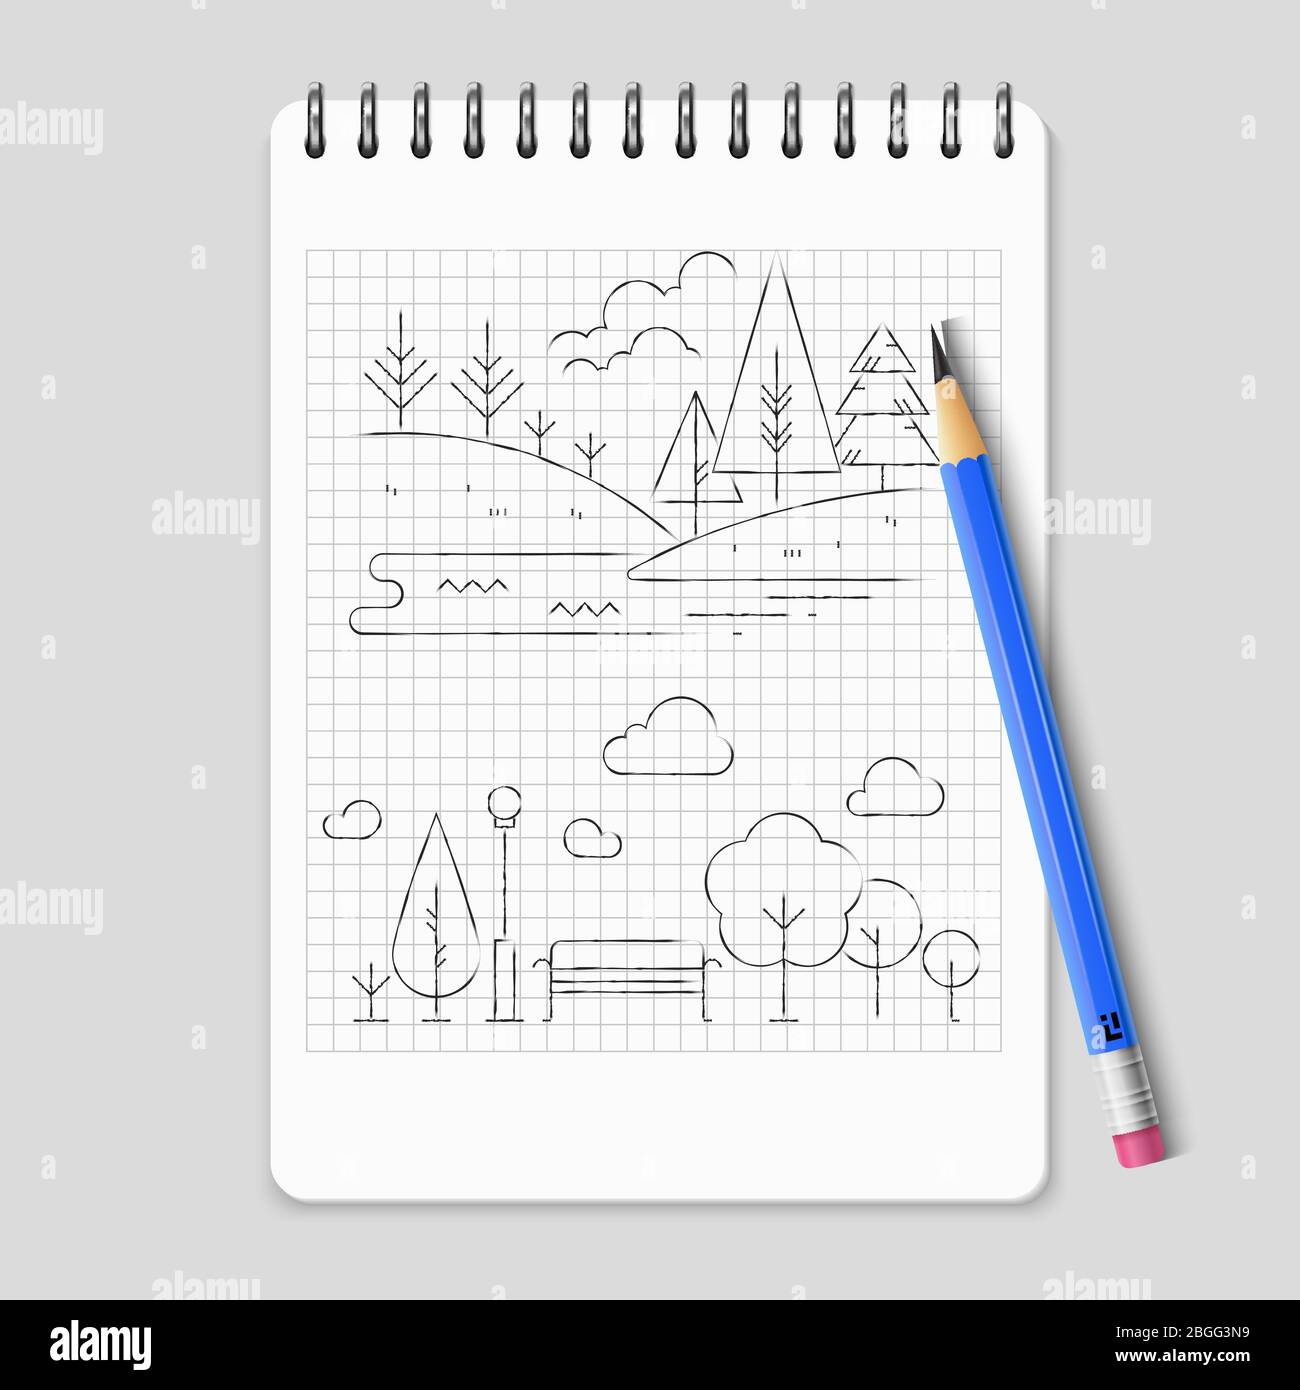 Pencil drawing nature landscape outline vector. Illustration of landscape tree and field scene sketchy Stock Vector